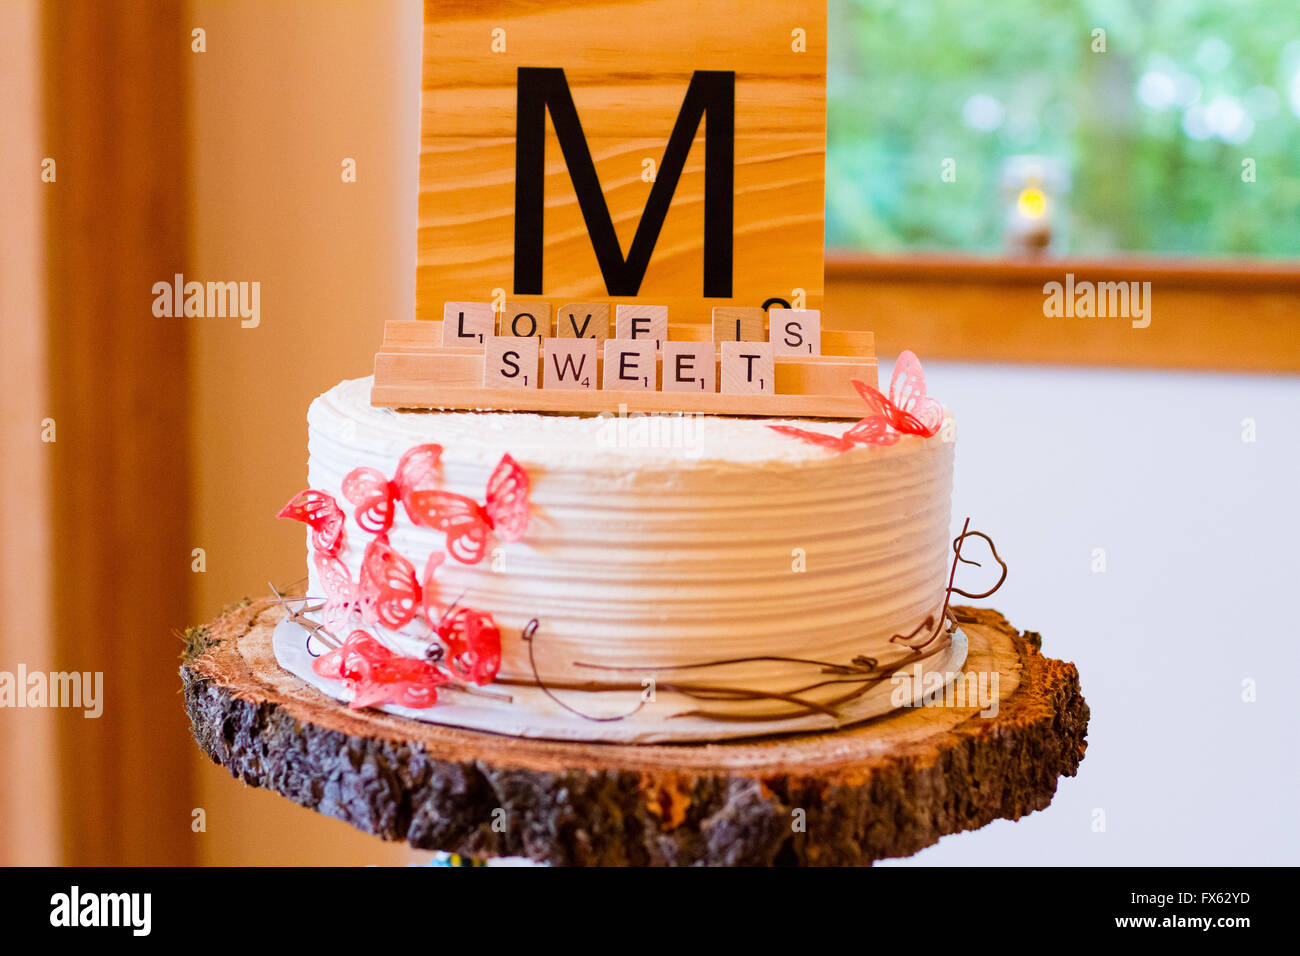 Scrabble letters at a wedding reception are used as decor to spell out the words love is sweet. Stock Photo